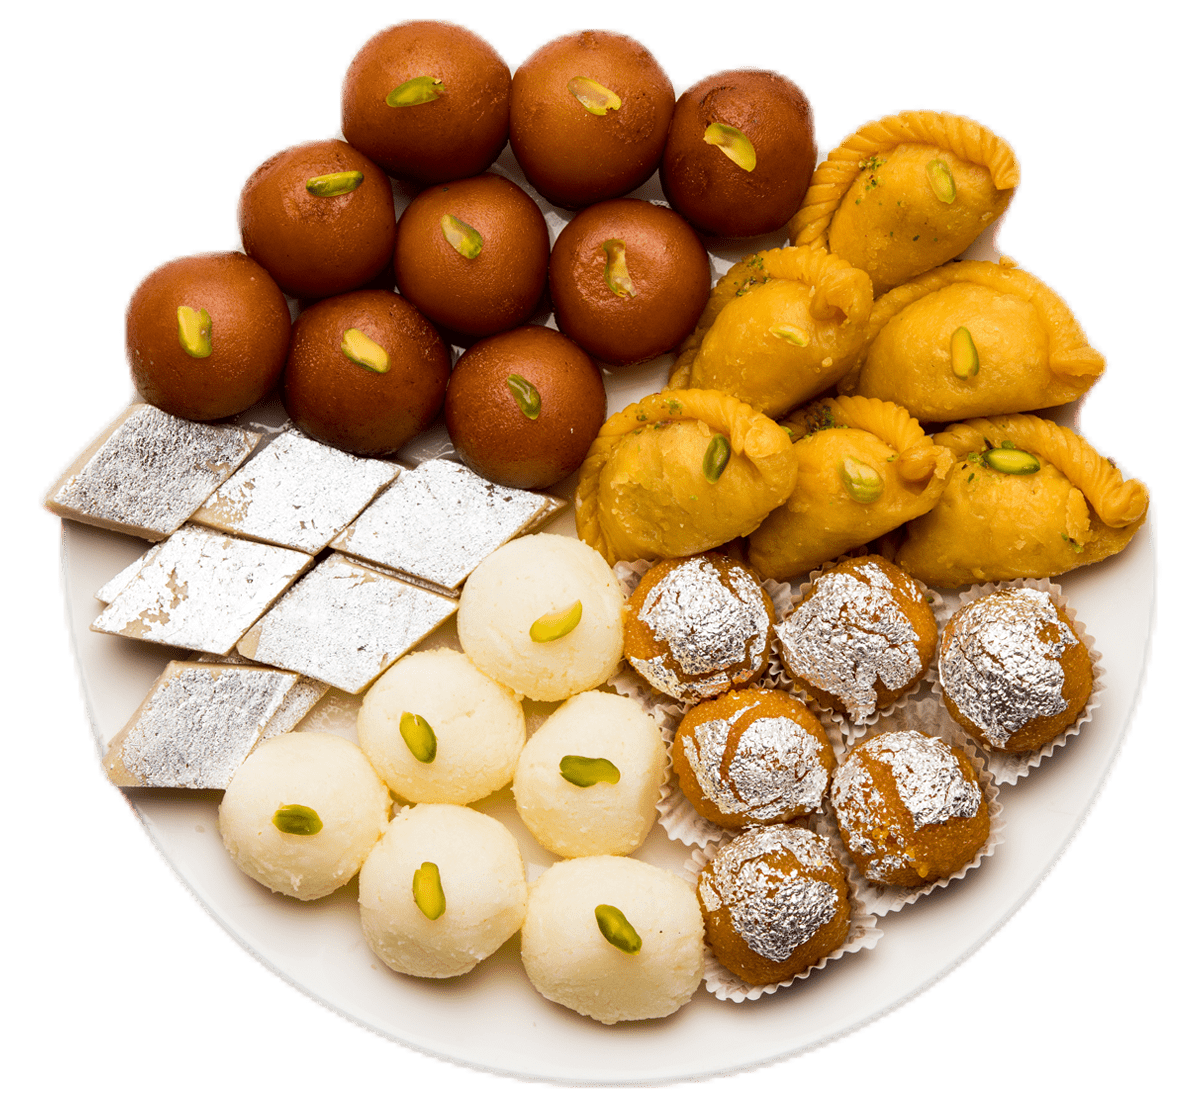 Order your favorite sweets online